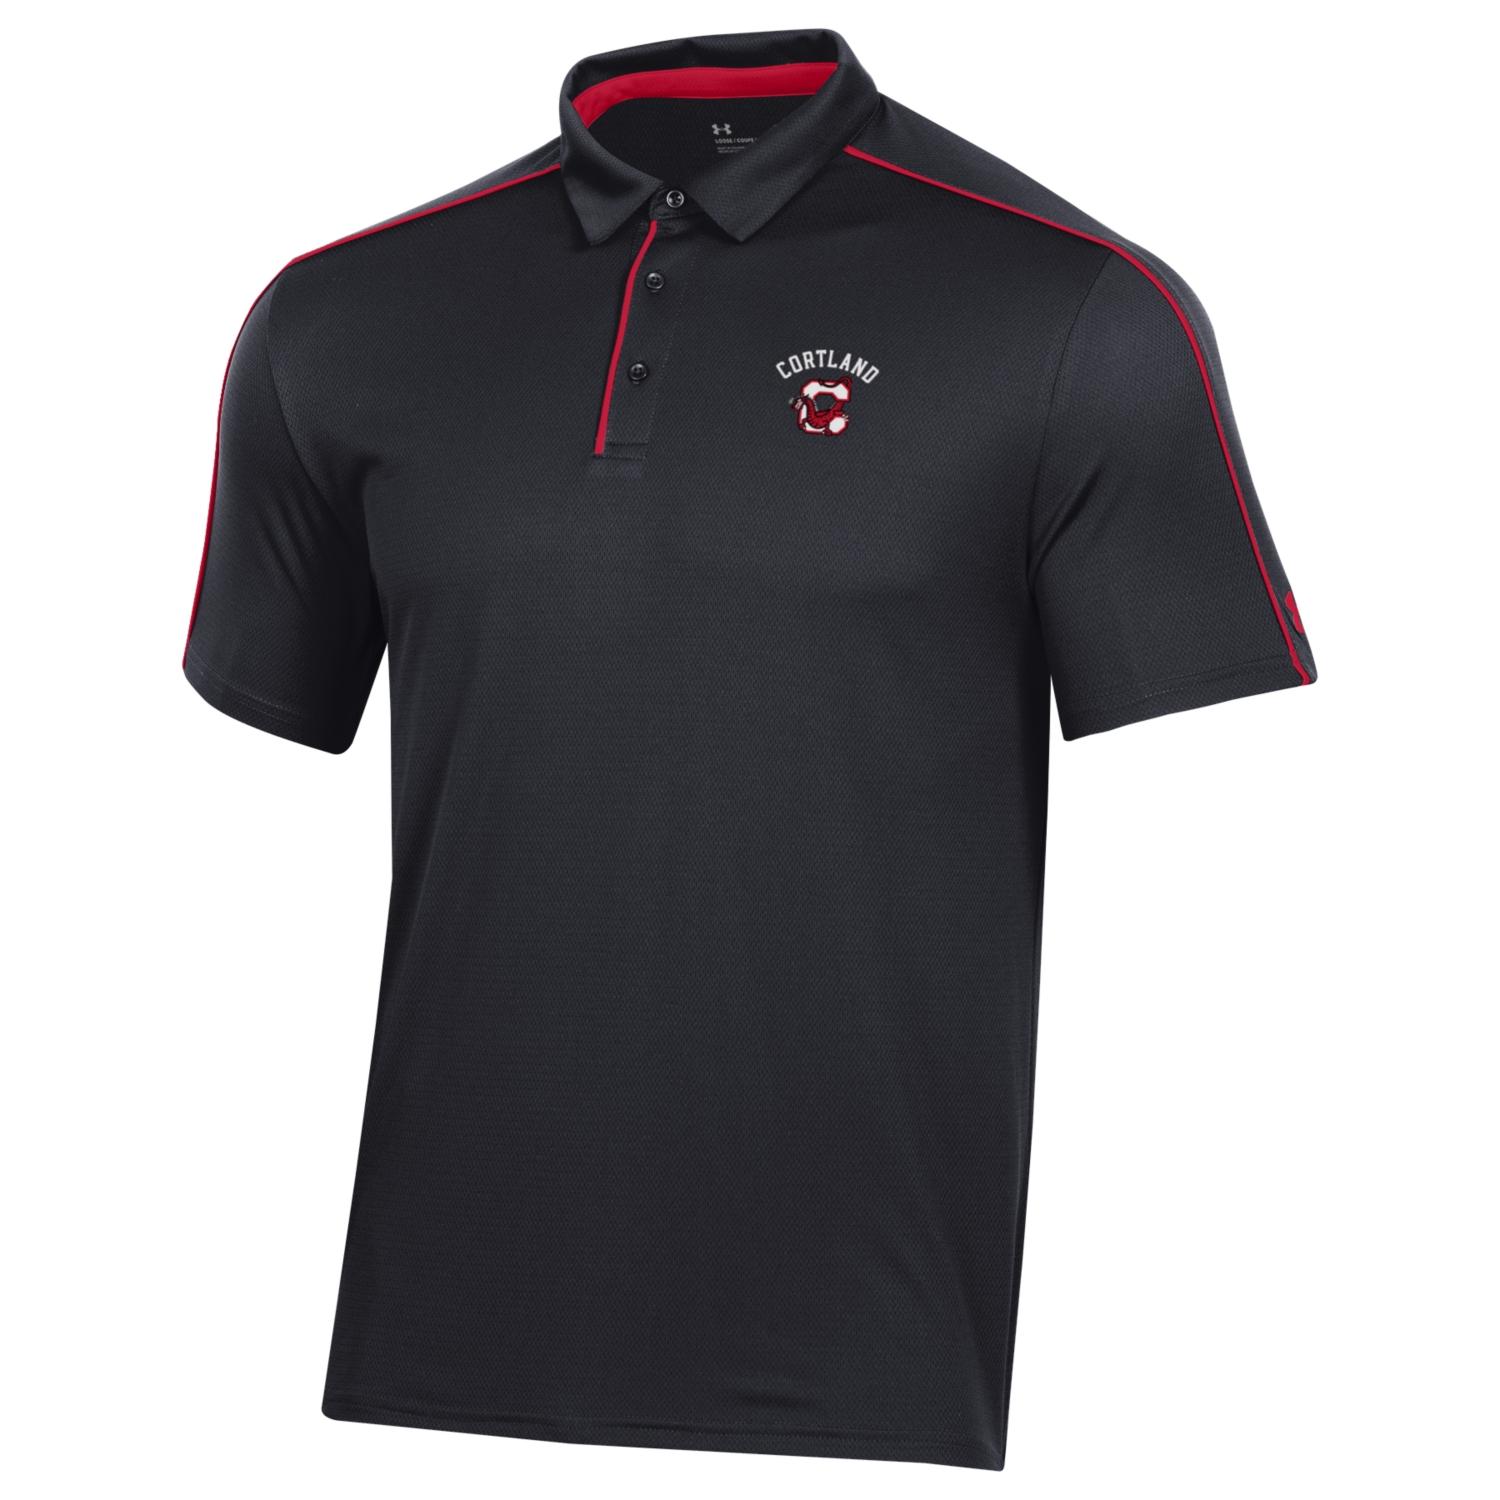 UA GAMEDAY TECH POLO | The Campus Store